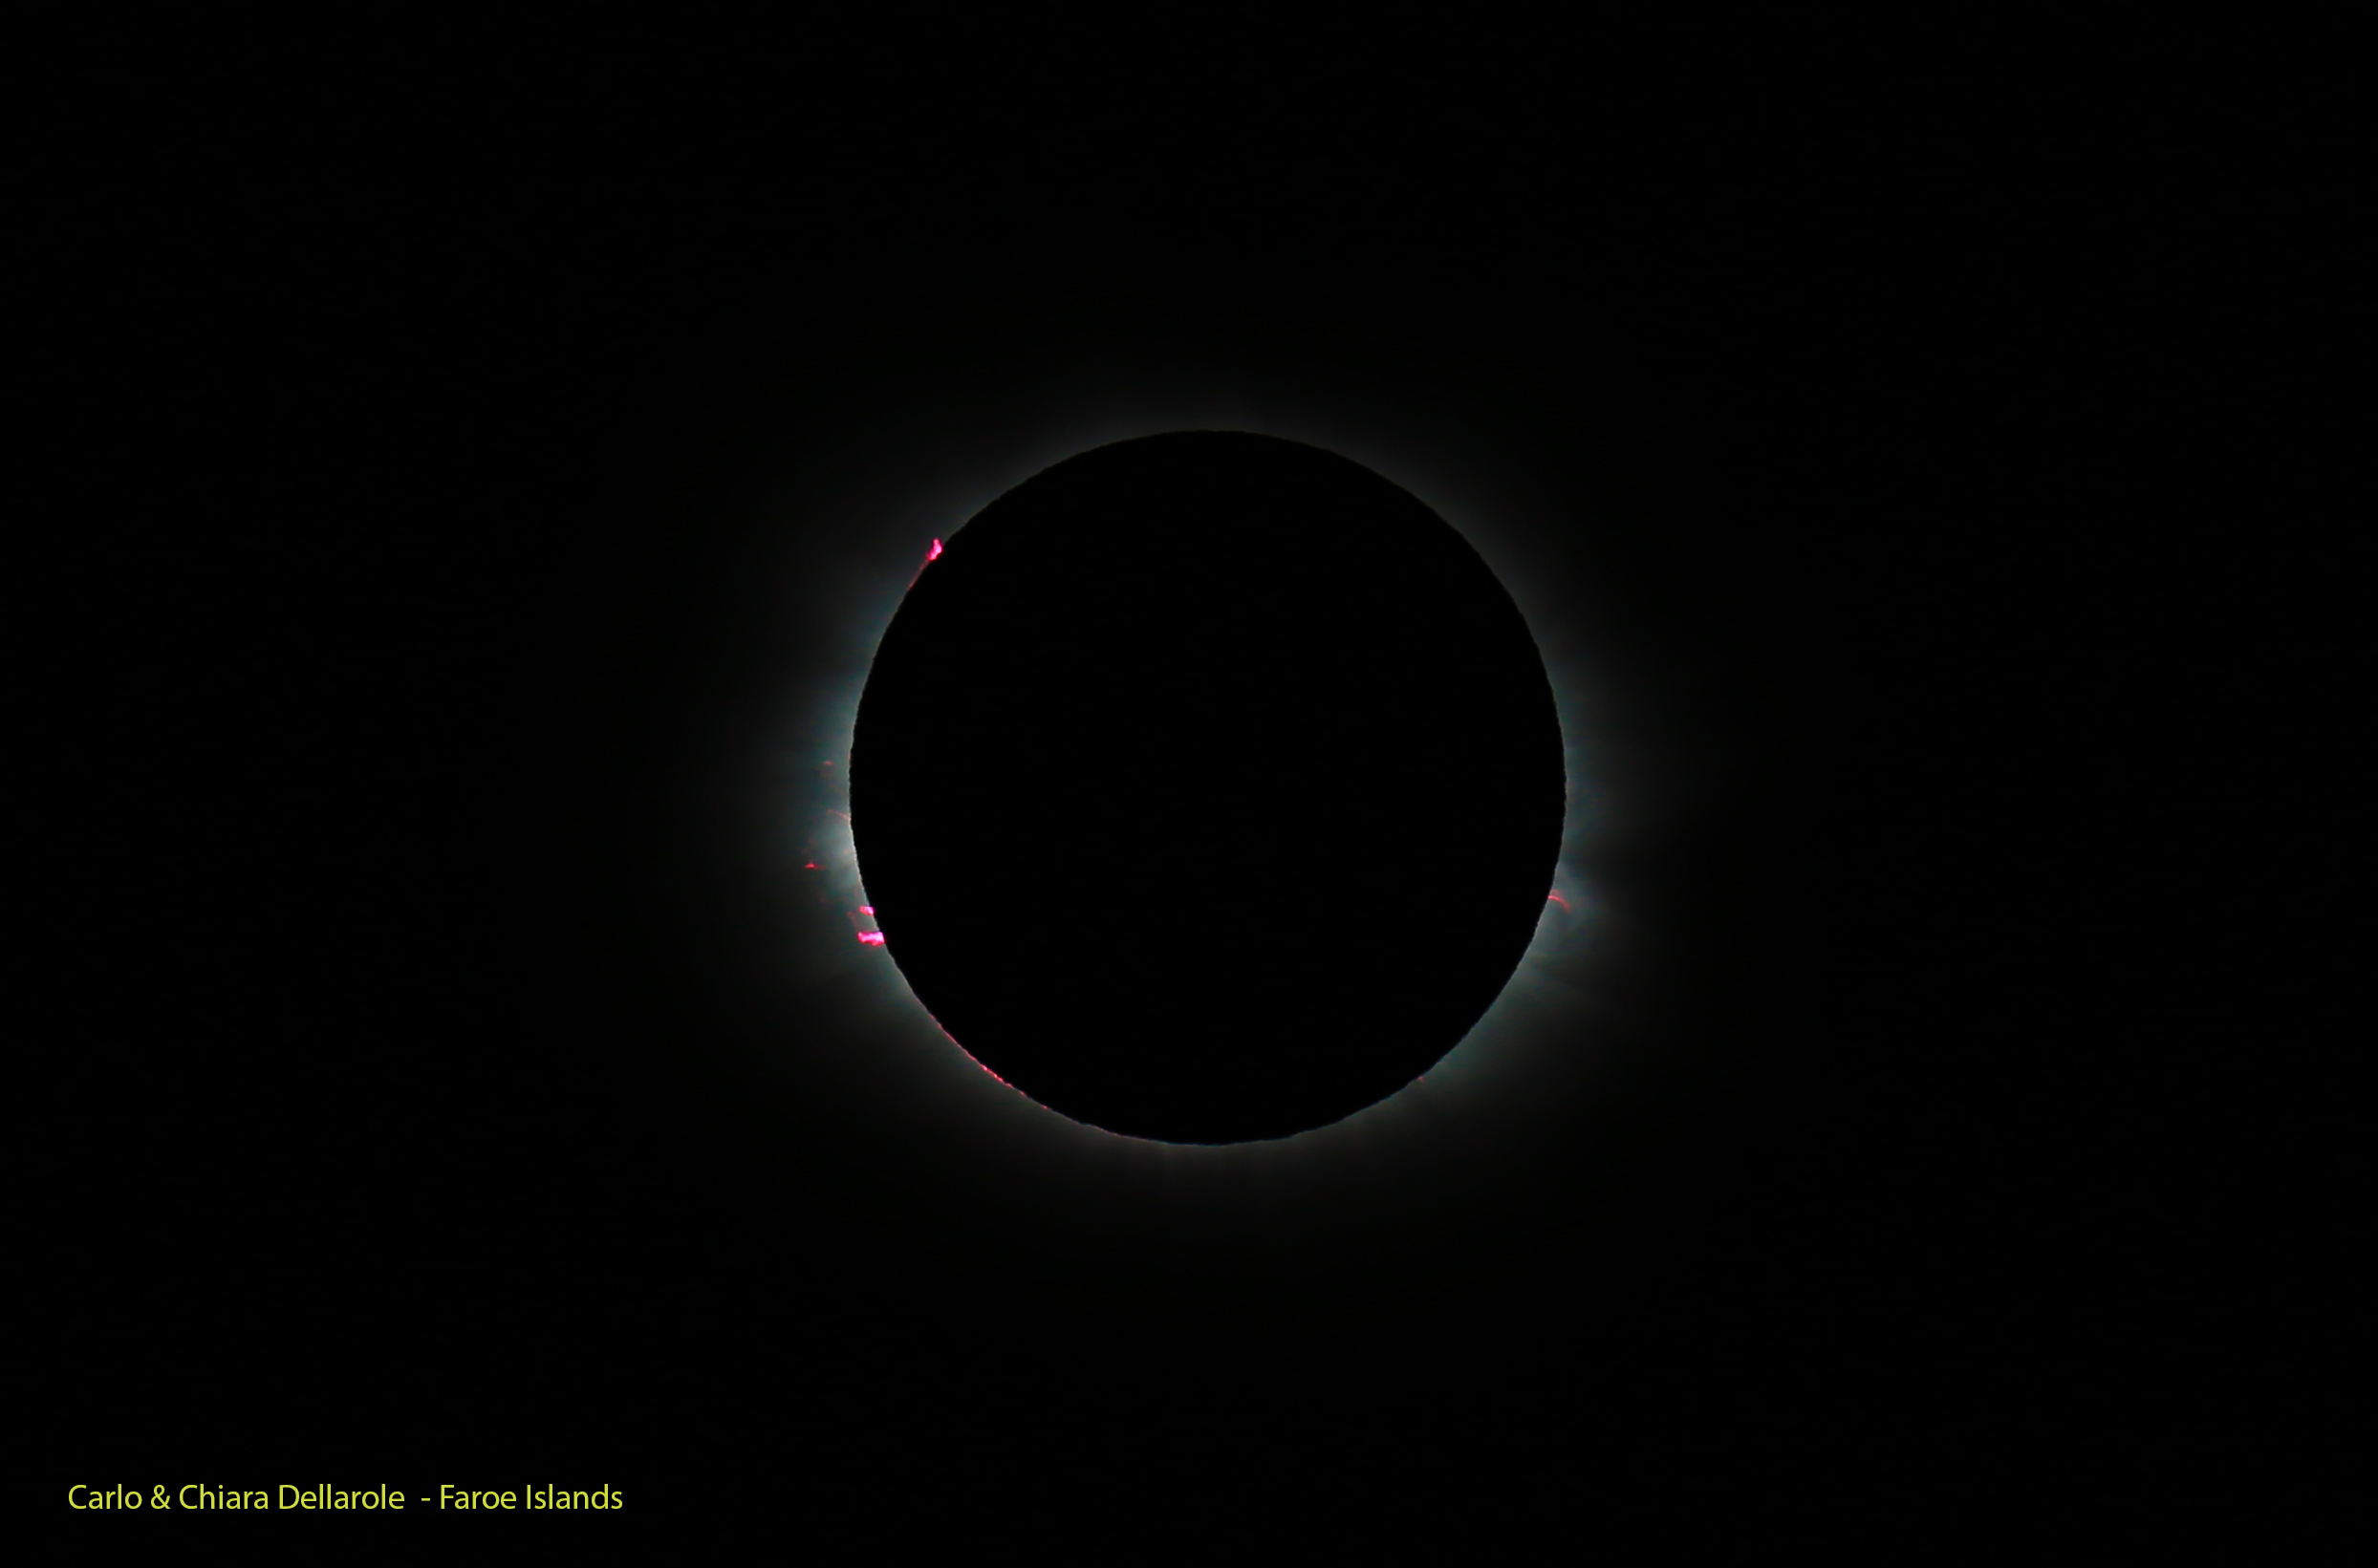 Total sun eclipse photographed from Fær Øer Islands: 758 KB; click on the image to enlarge